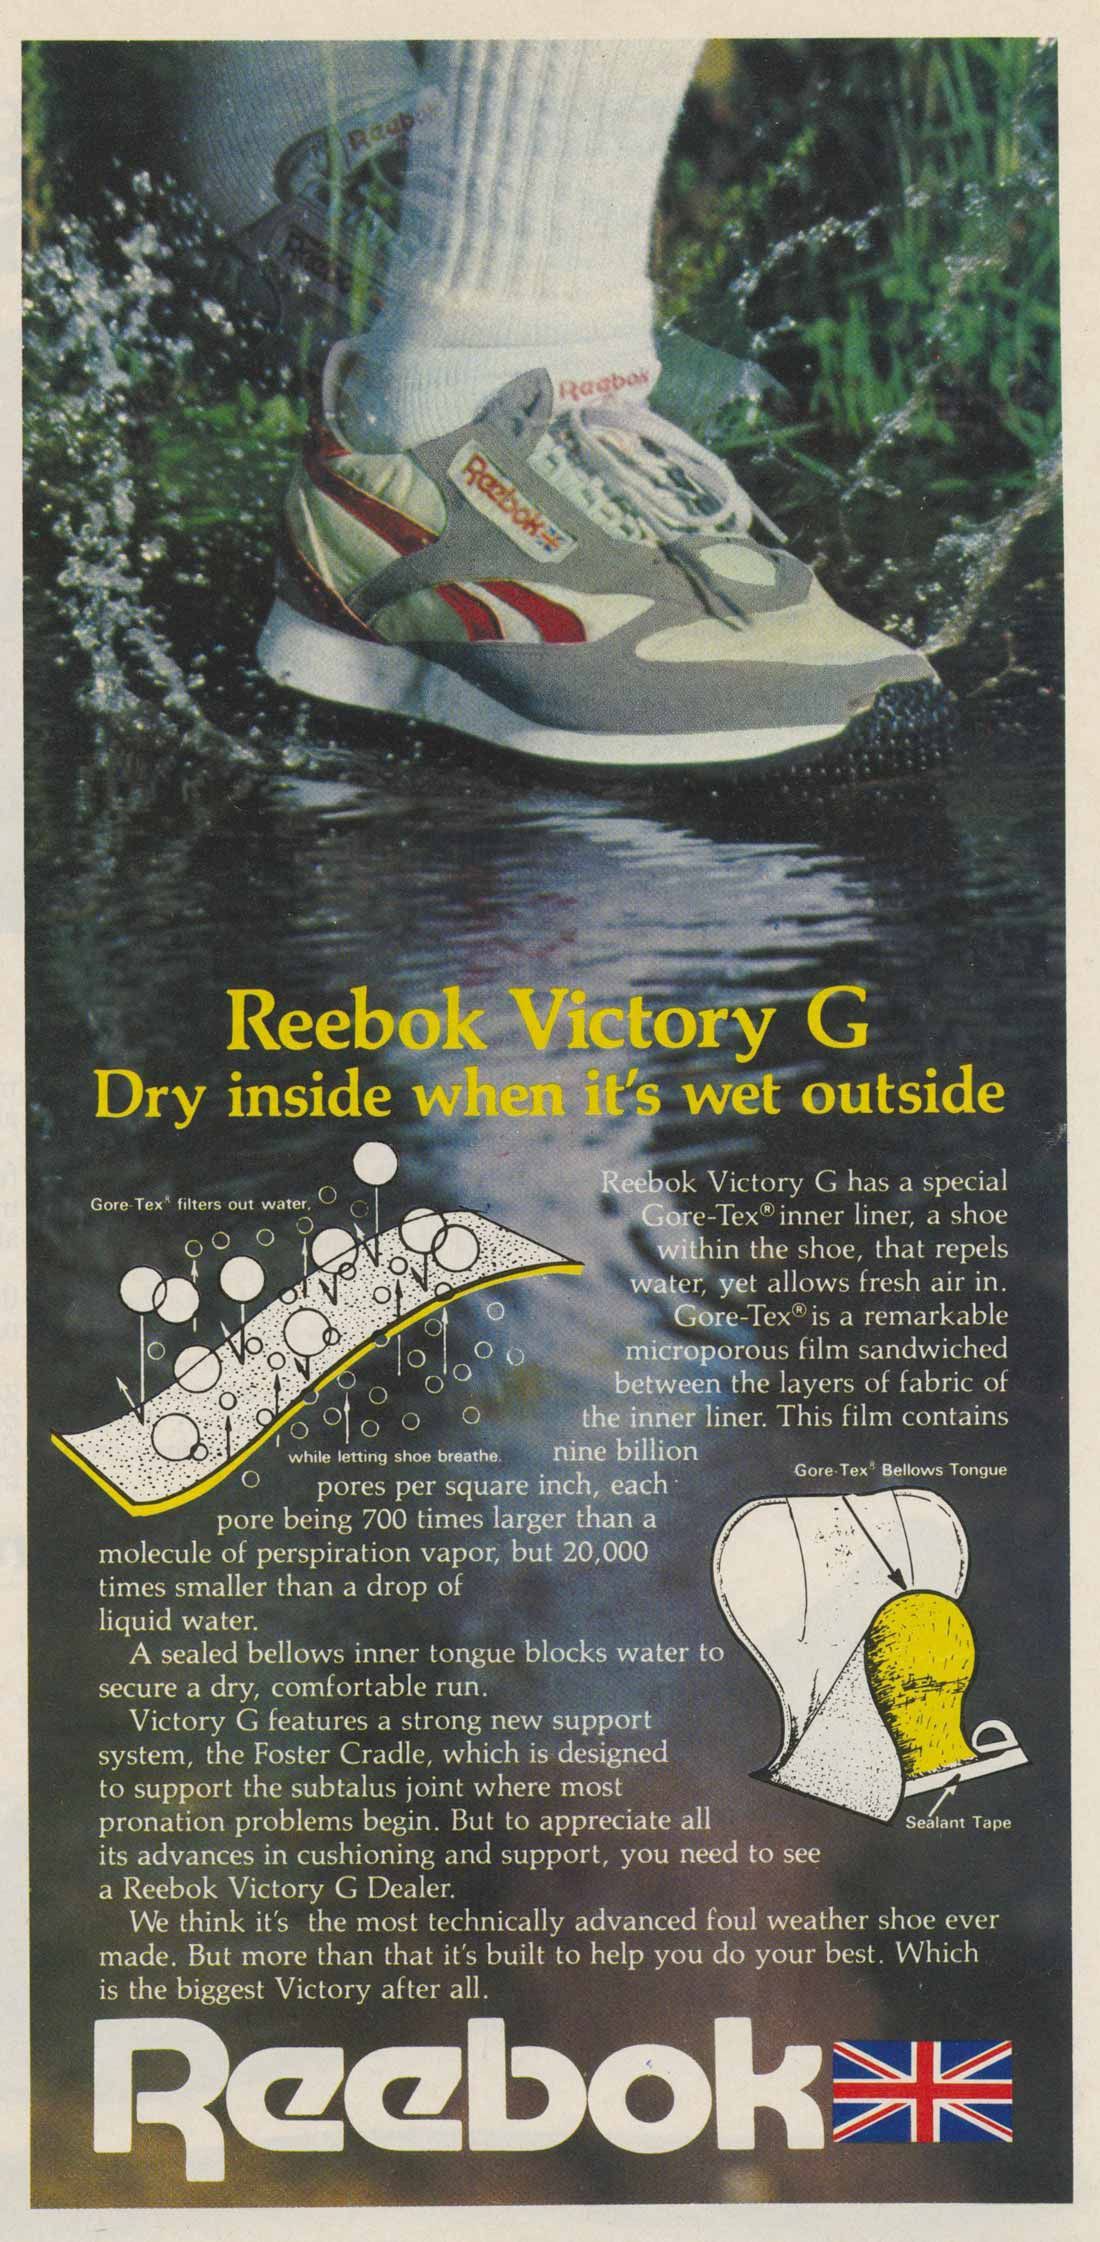 1982 – Reebok Victory G featuring GORE-TEX Inner Liner